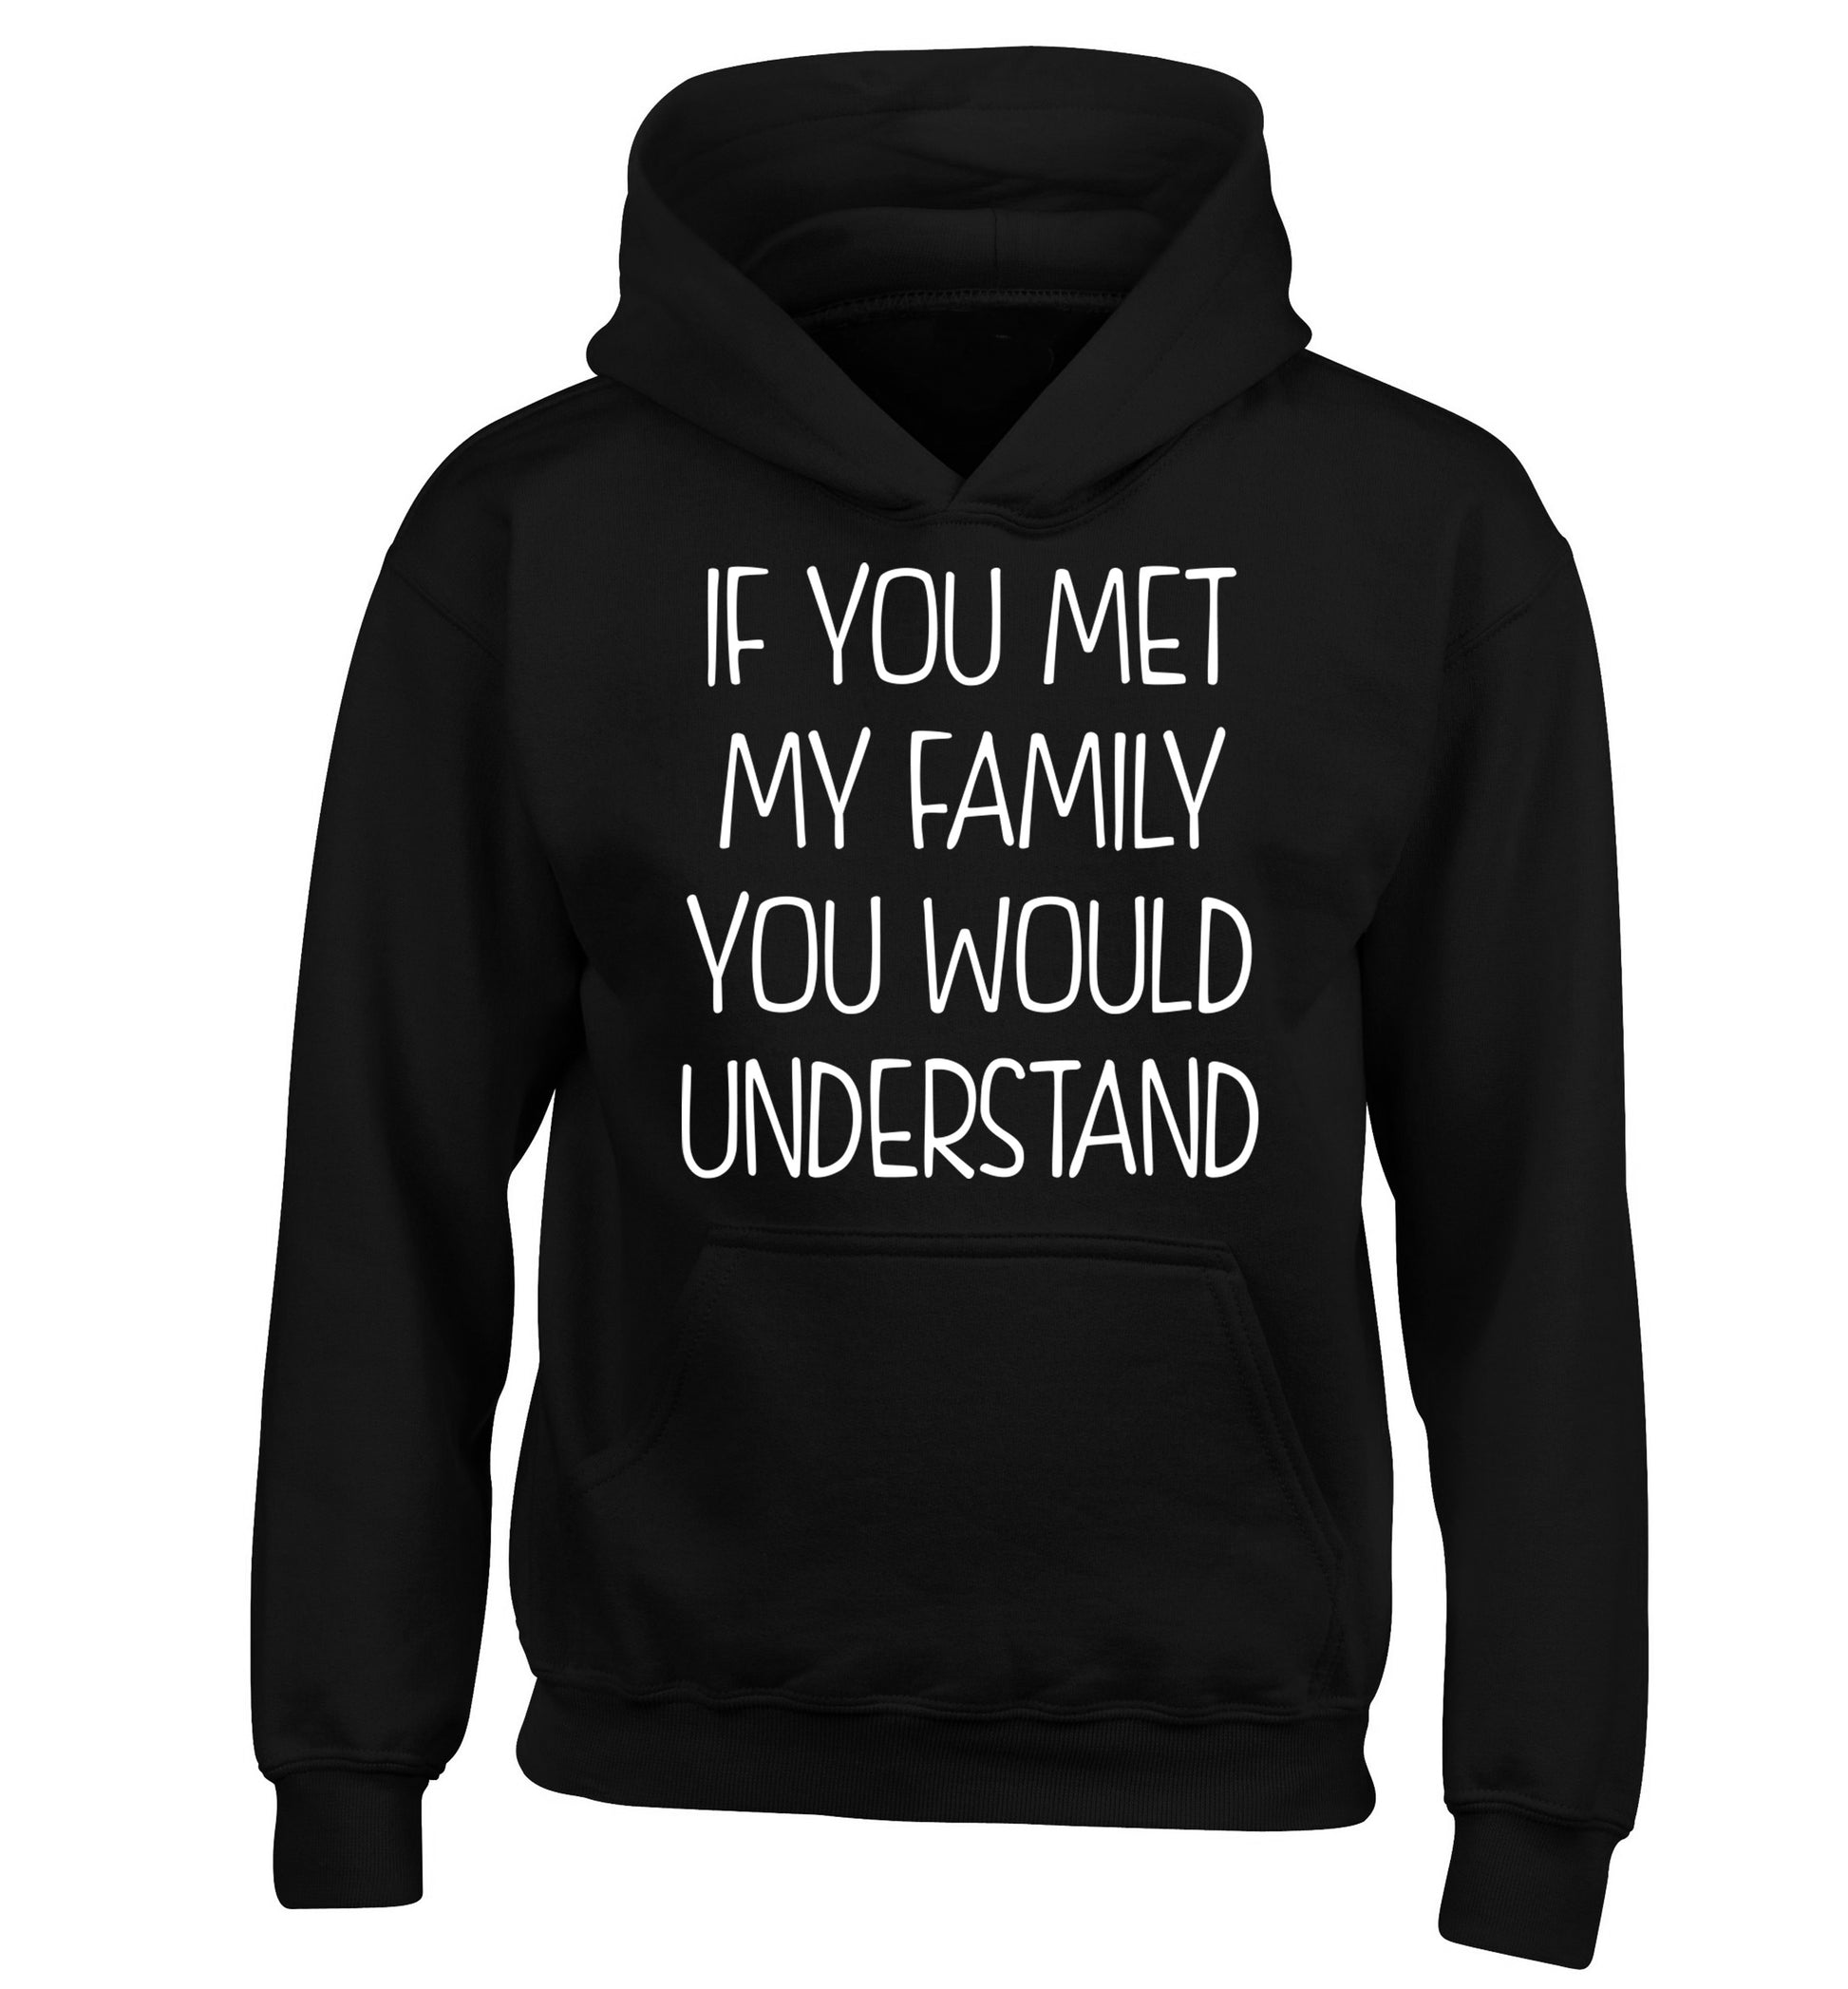 If you met my family you would understand children's black hoodie 12-13 Years